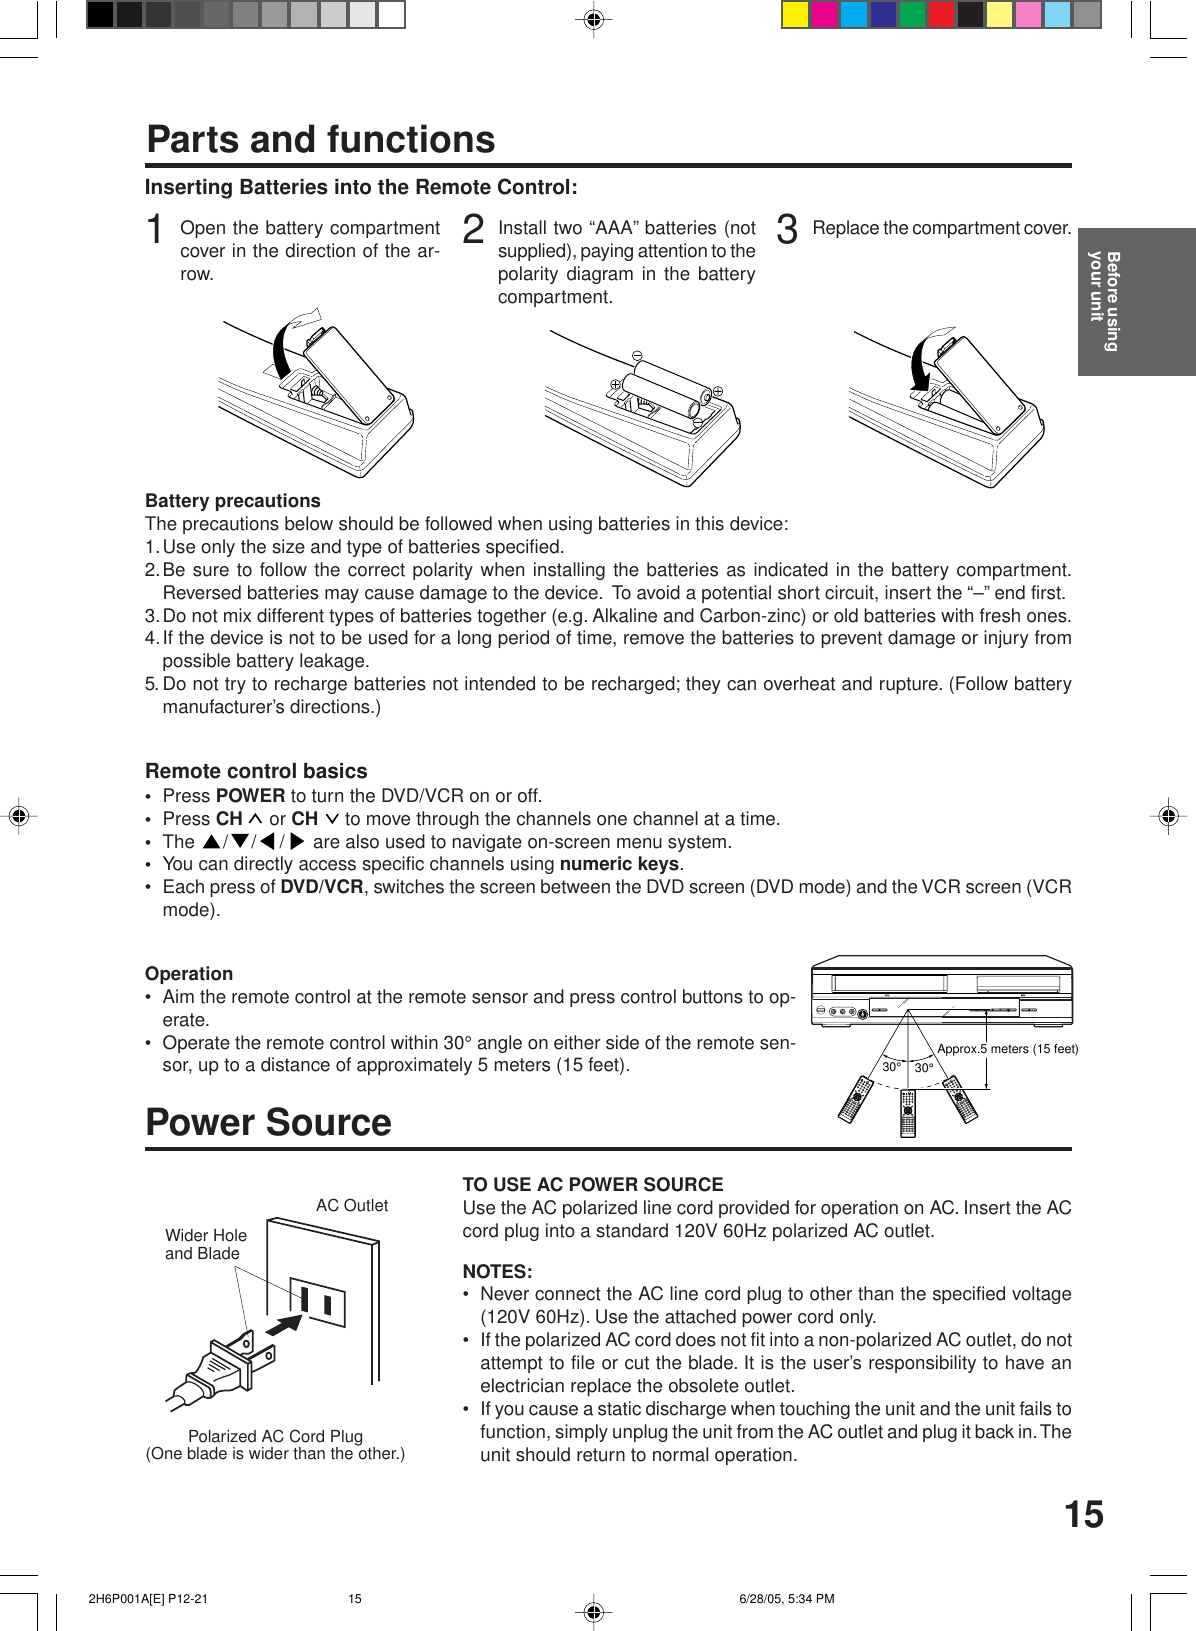 15Inserting Batteries into the Remote Control:Parts and functions3Replace the compartment cover.2Install two “AAA” batteries (notsupplied), paying attention to thepolarity diagram in the batterycompartment.1Open the battery compartmentcover in the direction of the ar-row.Battery precautionsThe precautions below should be followed when using batteries in this device:1.Use only the size and type of batteries specified.2.Be sure to follow the correct polarity when installing the batteries as indicated in the battery compartment.Reversed batteries may cause damage to the device.  To avoid a potential short circuit, insert the “–” end first.3.Do not mix different types of batteries together (e.g. Alkaline and Carbon-zinc) or old batteries with fresh ones.4.If the device is not to be used for a long period of time, remove the batteries to prevent damage or injury frompossible battery leakage.5. Do not try to recharge batteries not intended to be recharged; they can overheat and rupture. (Follow batterymanufacturer’s directions.)Remote control basics•Press POWER to turn the DVD/VCR on or off.•Press CH   or CH   to move through the channels one channel at a time.•The  / / /  are also used to navigate on-screen menu system.•You can directly access specific channels using numeric keys.• Each press of DVD/VCR, switches the screen between the DVD screen (DVD mode) and the VCR screen (VCRmode).Operation• Aim the remote control at the remote sensor and press control buttons to op-erate.• Operate the remote control within 30° angle on either side of the remote sen-sor, up to a distance of approximately 5 meters (15 feet).Polarized AC Cord Plug(One blade is wider than the other.)AC OutletWider Holeand BladePower SourceTO USE AC POWER SOURCEUse the AC polarized line cord provided for operation on AC. Insert the ACcord plug into a standard 120V 60Hz polarized AC outlet.NOTES:• Never connect the AC line cord plug to other than the specified voltage(120V 60Hz). Use the attached power cord only.• If the polarized AC cord does not fit into a non-polarized AC outlet, do notattempt to file or cut the blade. It is the user’s responsibility to have anelectrician replace the obsolete outlet.• If you cause a static discharge when touching the unit and the unit fails tofunction, simply unplug the unit from the AC outlet and plug it back in. Theunit should return to normal operation.Before usingyour unit30°30°Approx.5 meters (15 feet) 2H6P001A[E] P12-21 6/28/05, 5:34 PM15